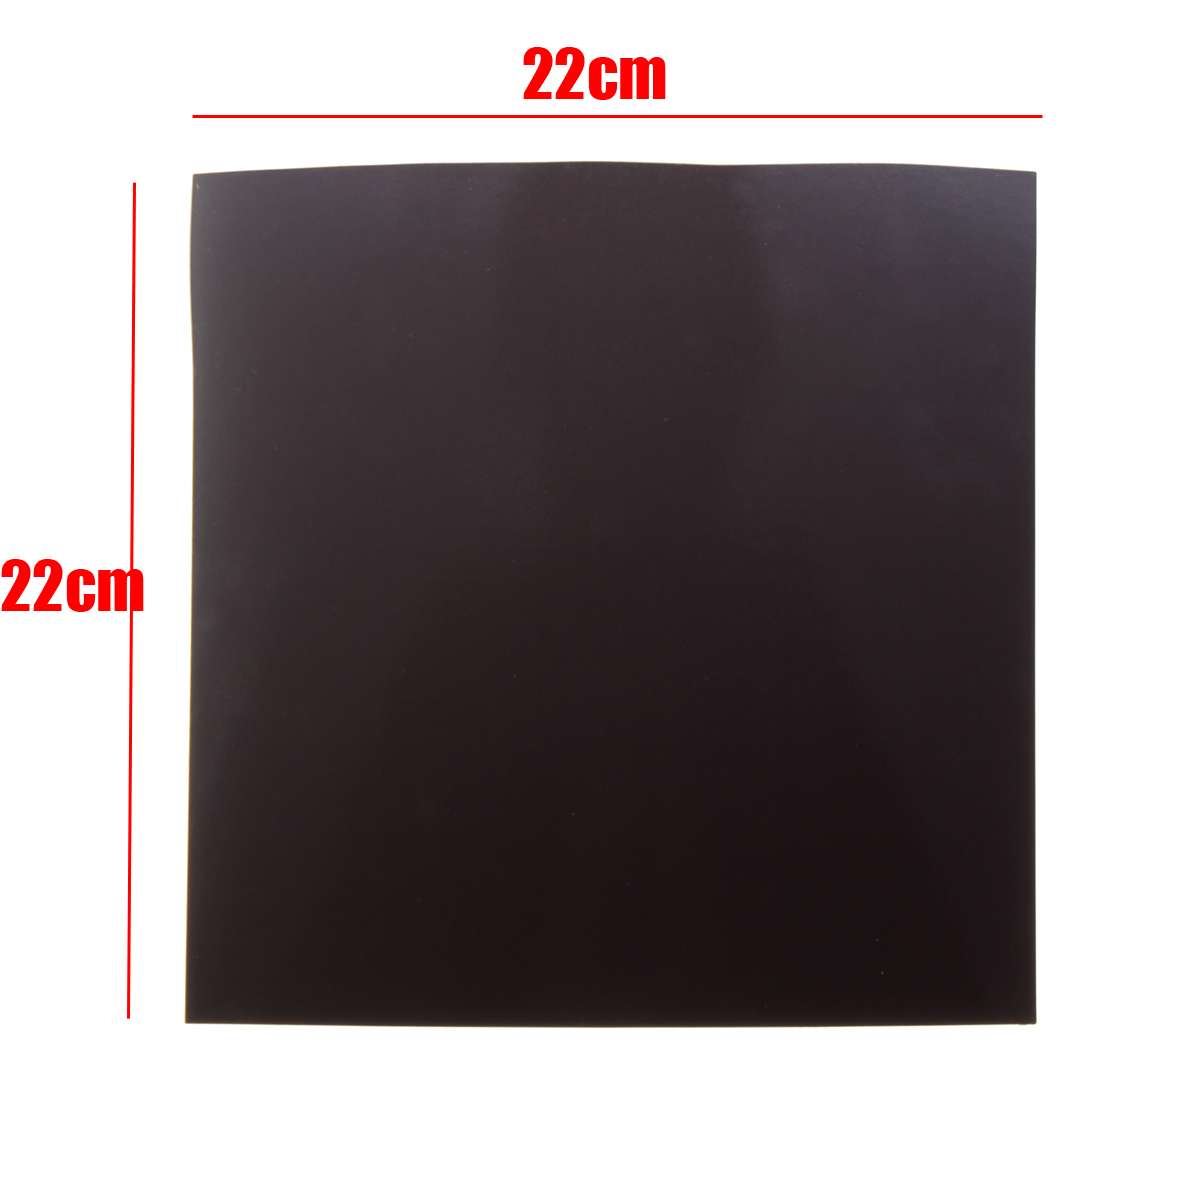 22x22cm A+B Magnetic Sheet Surface Platform Sticker For 3D Printer Creality Ender-3 Heated Bed 35